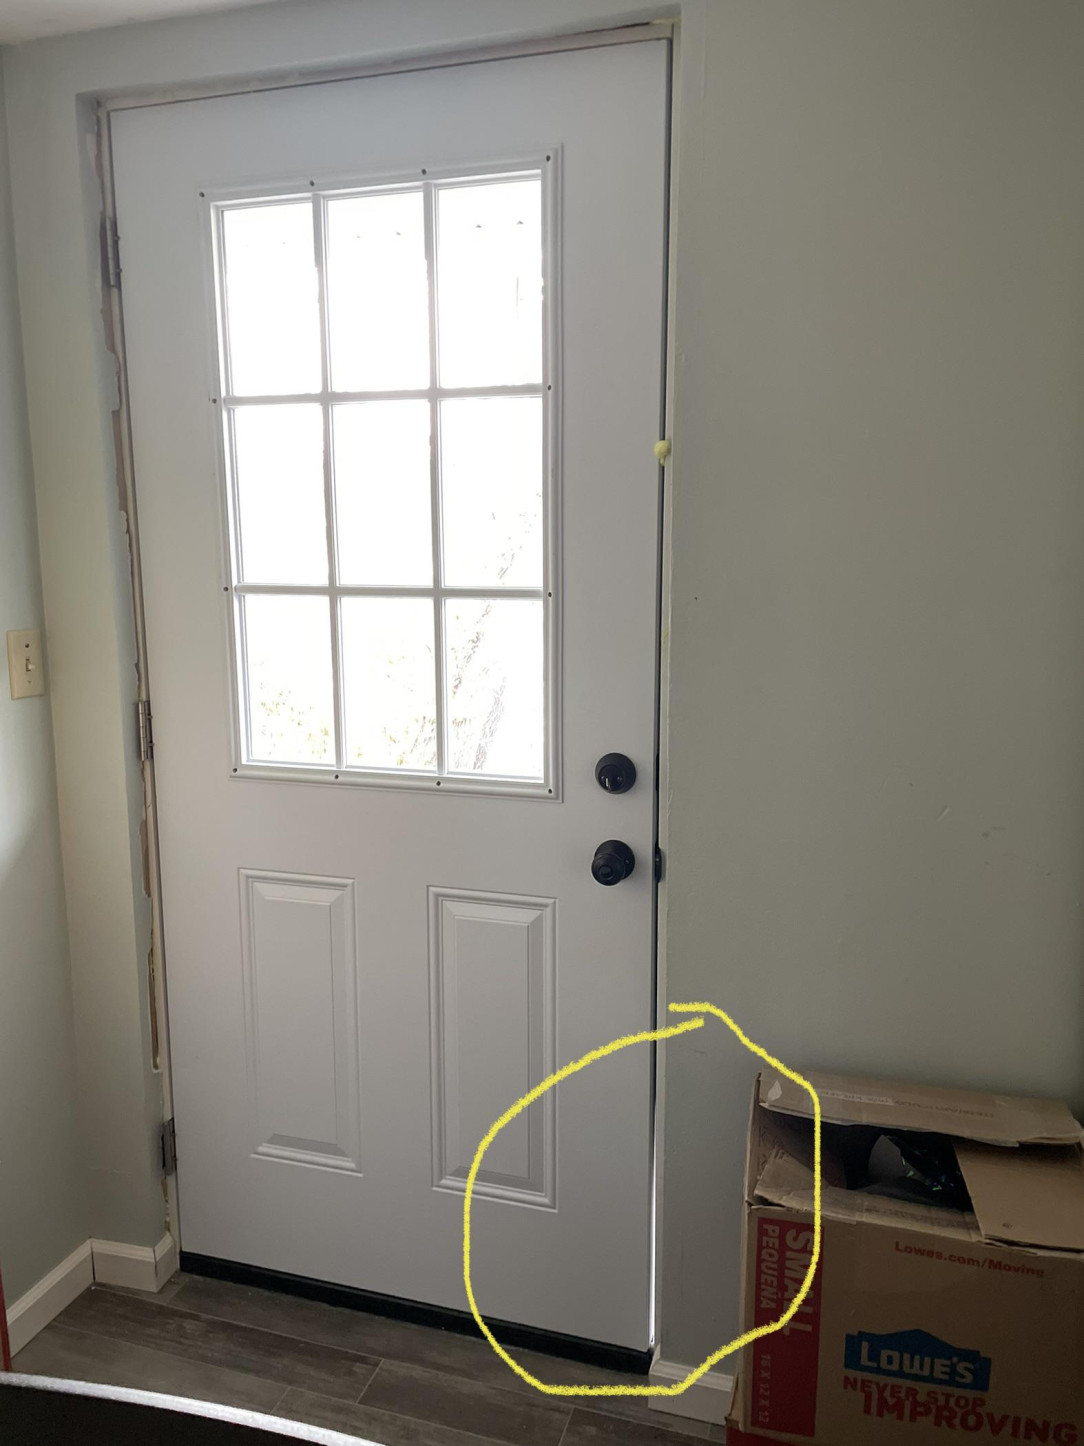 1100 dollars to replace a door that wouldn’t close all the way… for a nice door that doesn’t close all the way